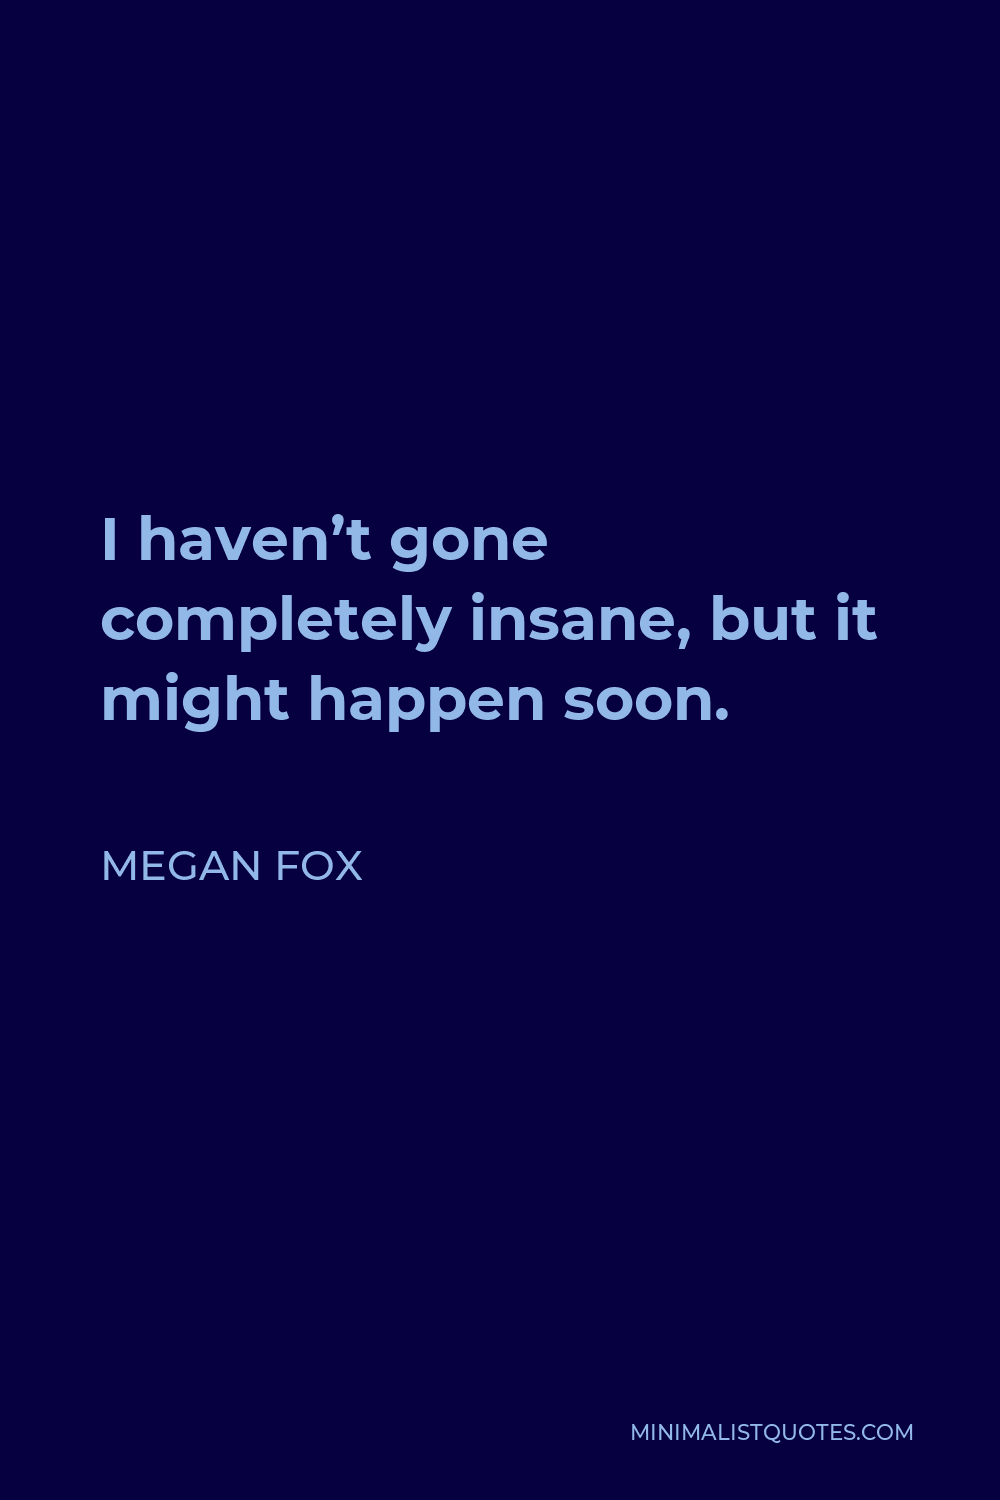 Megan Fox Quote - I haven’t gone completely insane, but it might happen soon.